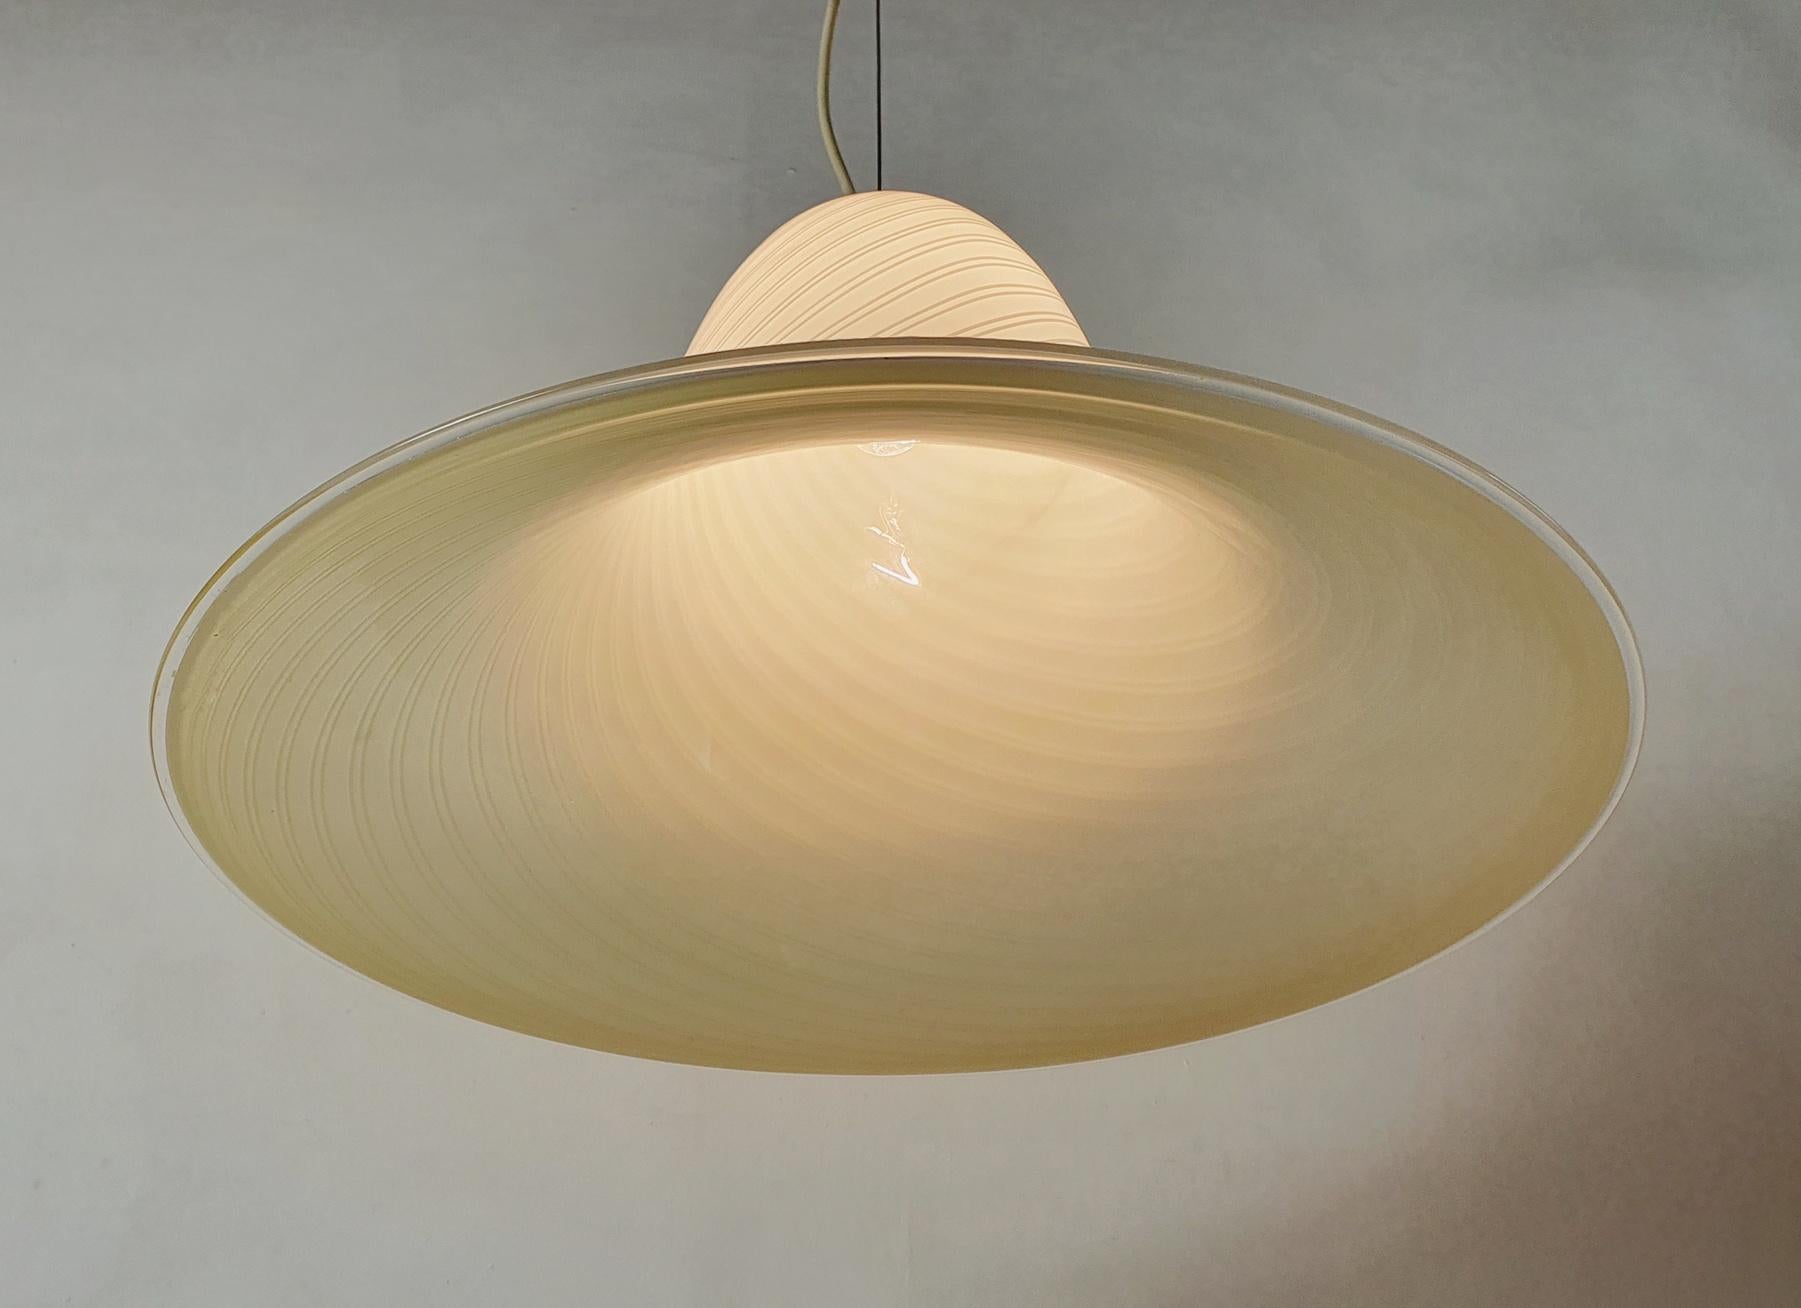 A beautiful large handmade Murano glass ceiling lamp with a swivel design in wheat/caramel and off-white. Elegant and striking in it´s simplicity. The light shines through the lamp and creates a beautiful shadows. We recommend a larger lightbulb for